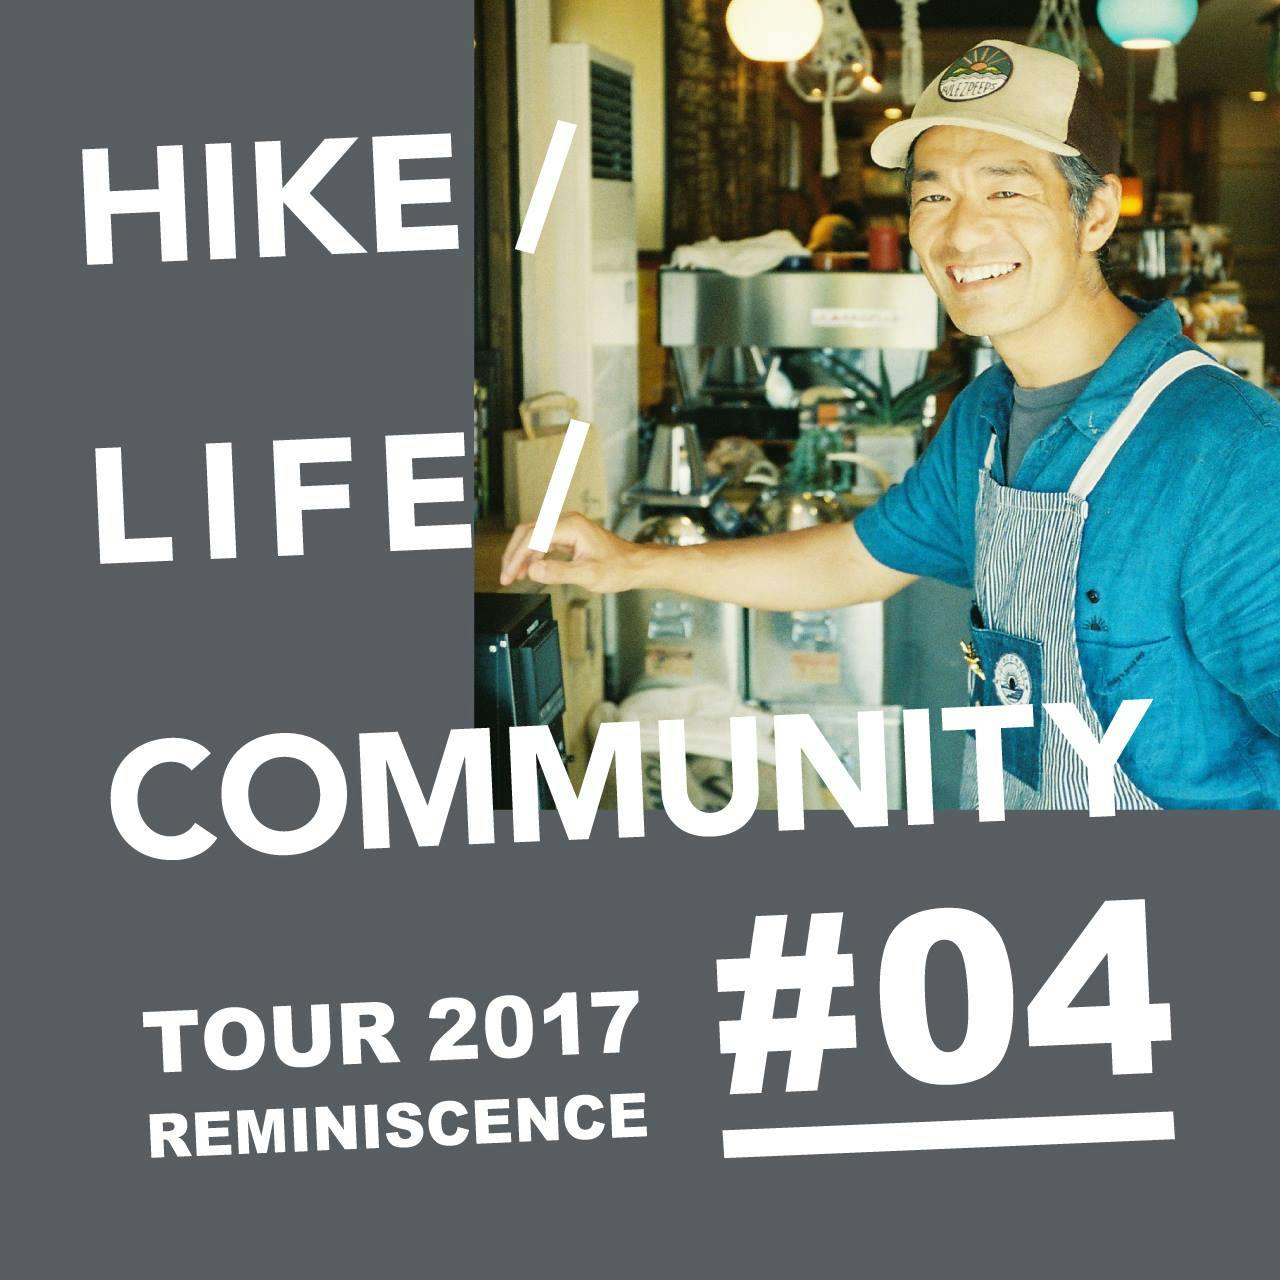 HIKE / LIFE / COMMUNITY <br> TOUR 2017 REMINISCENCE<br> #04 峠ヶ孝高（SPROUT）